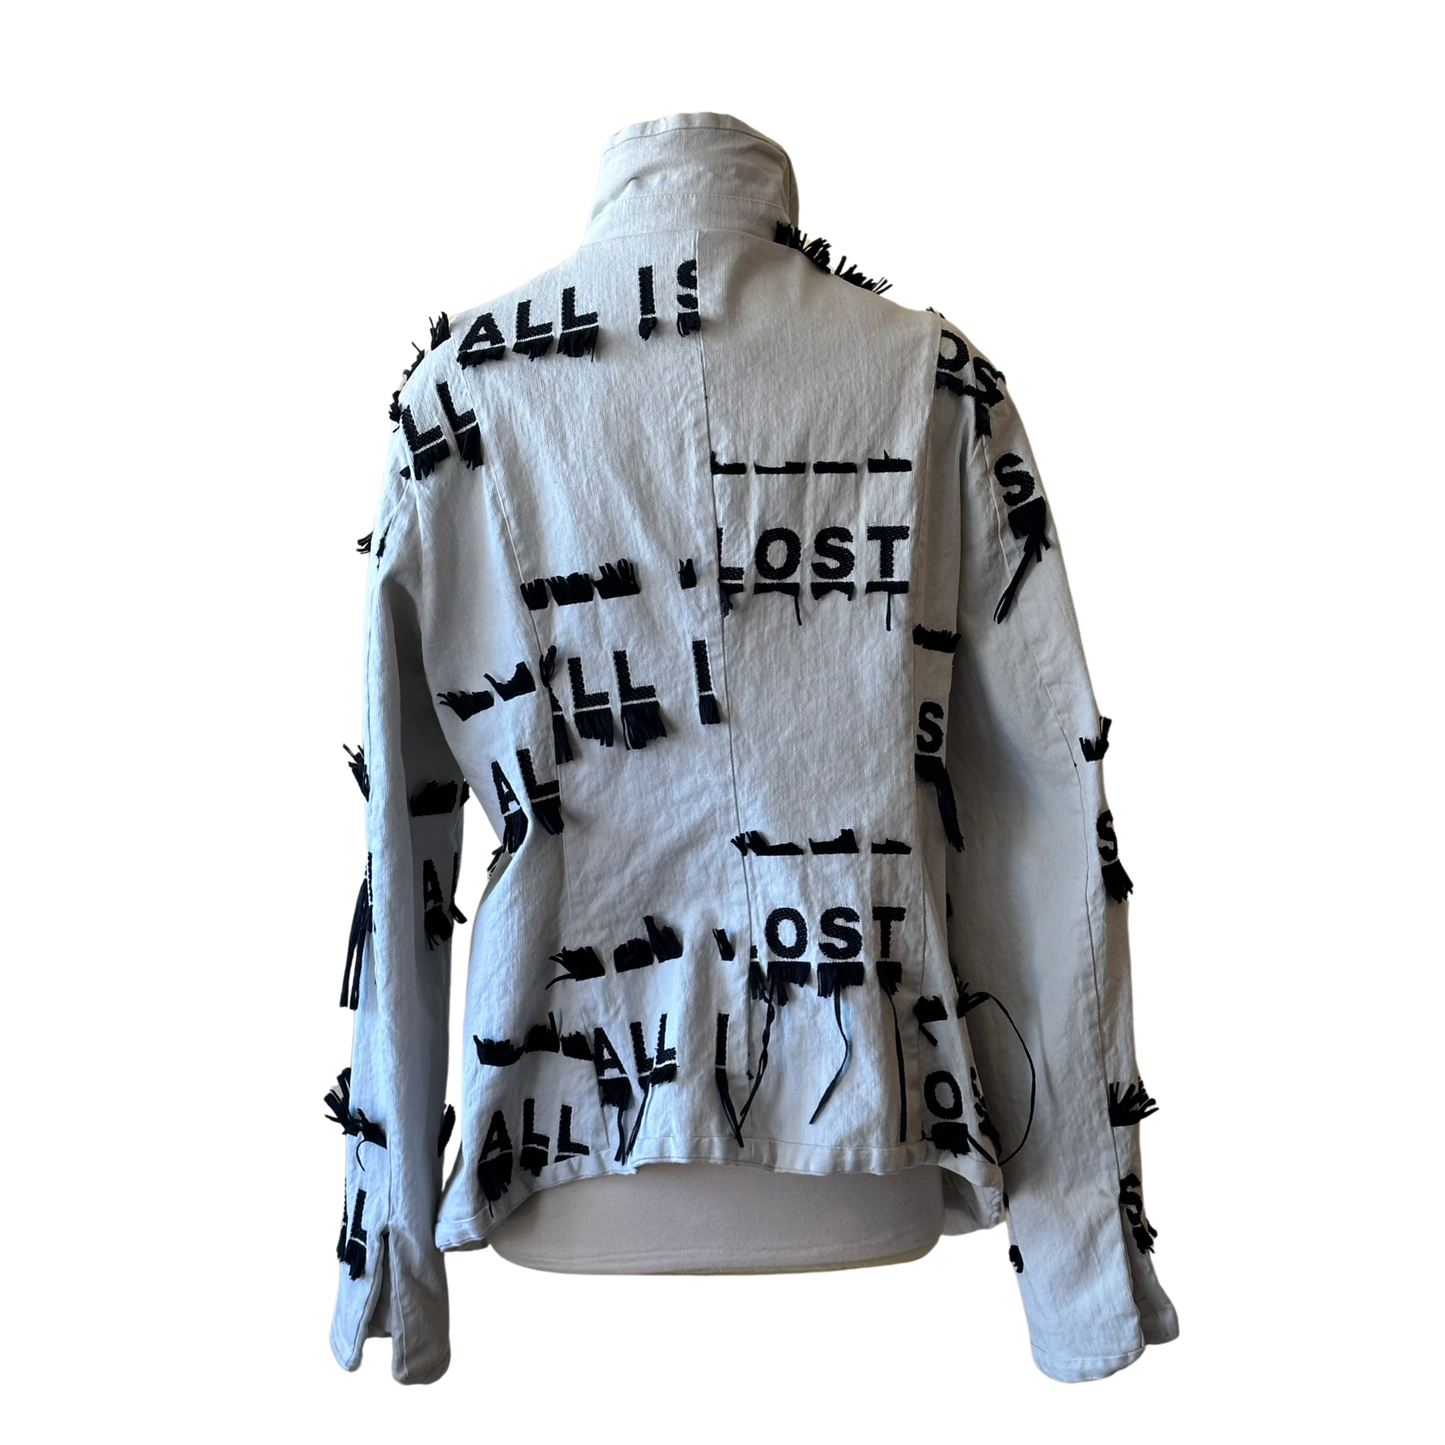 Rundholz “All Is Lost” Jacket XL